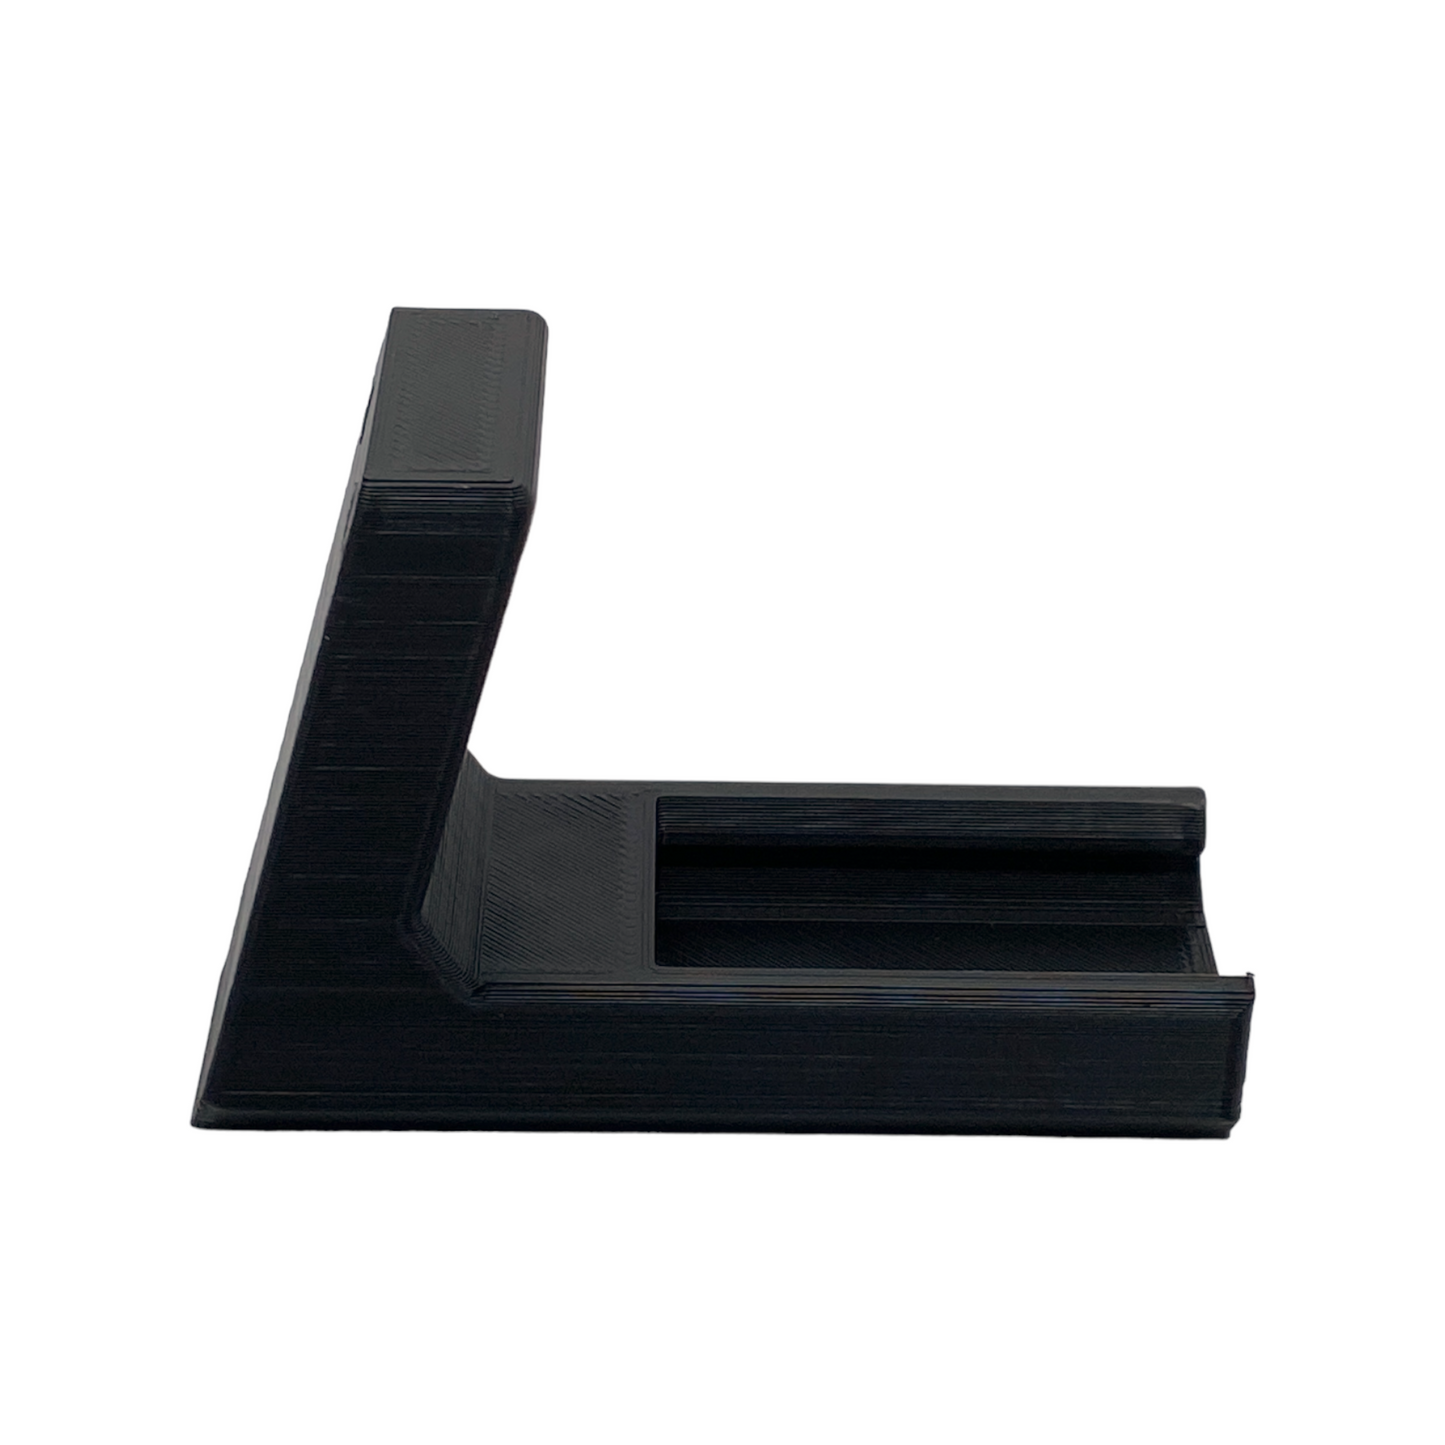 Glock Compatible Front Rail Wall Mount